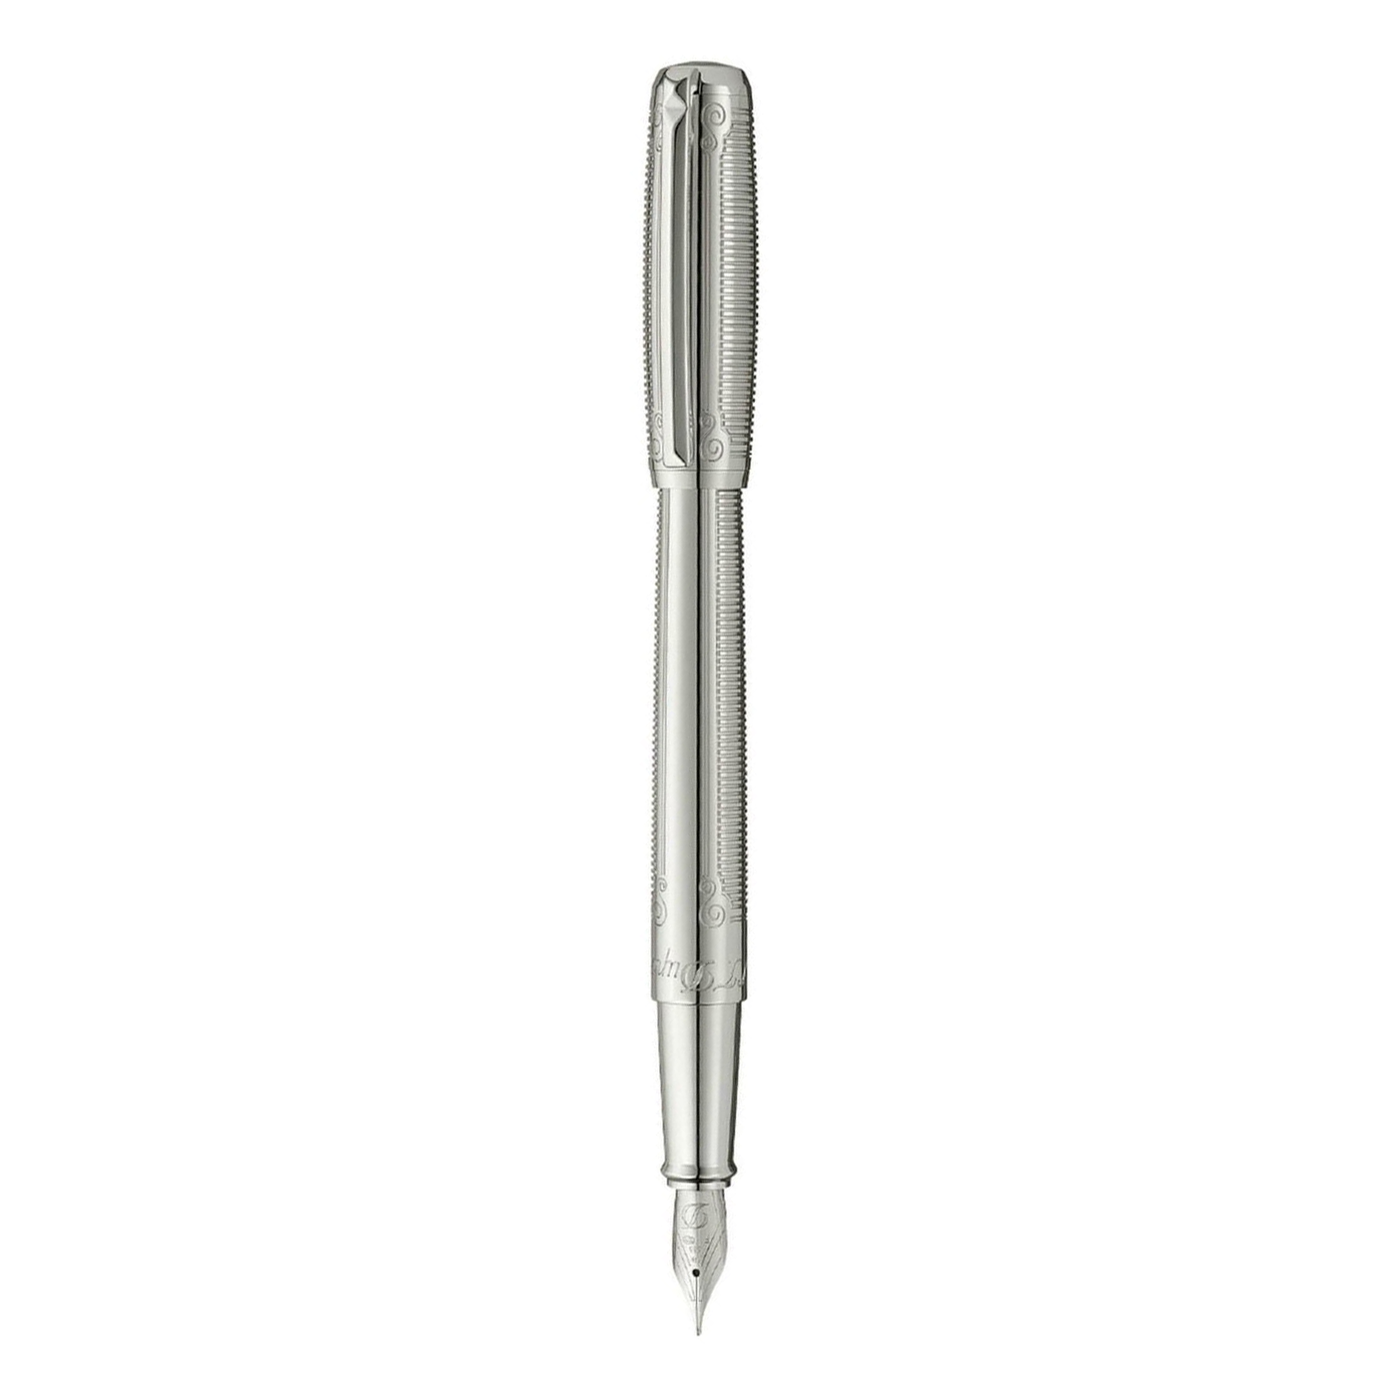 Shop The Latest Collection Of S.T. Dupont Line D Orfevre Arabesque Fountain Pen - 410673 In Lebanon